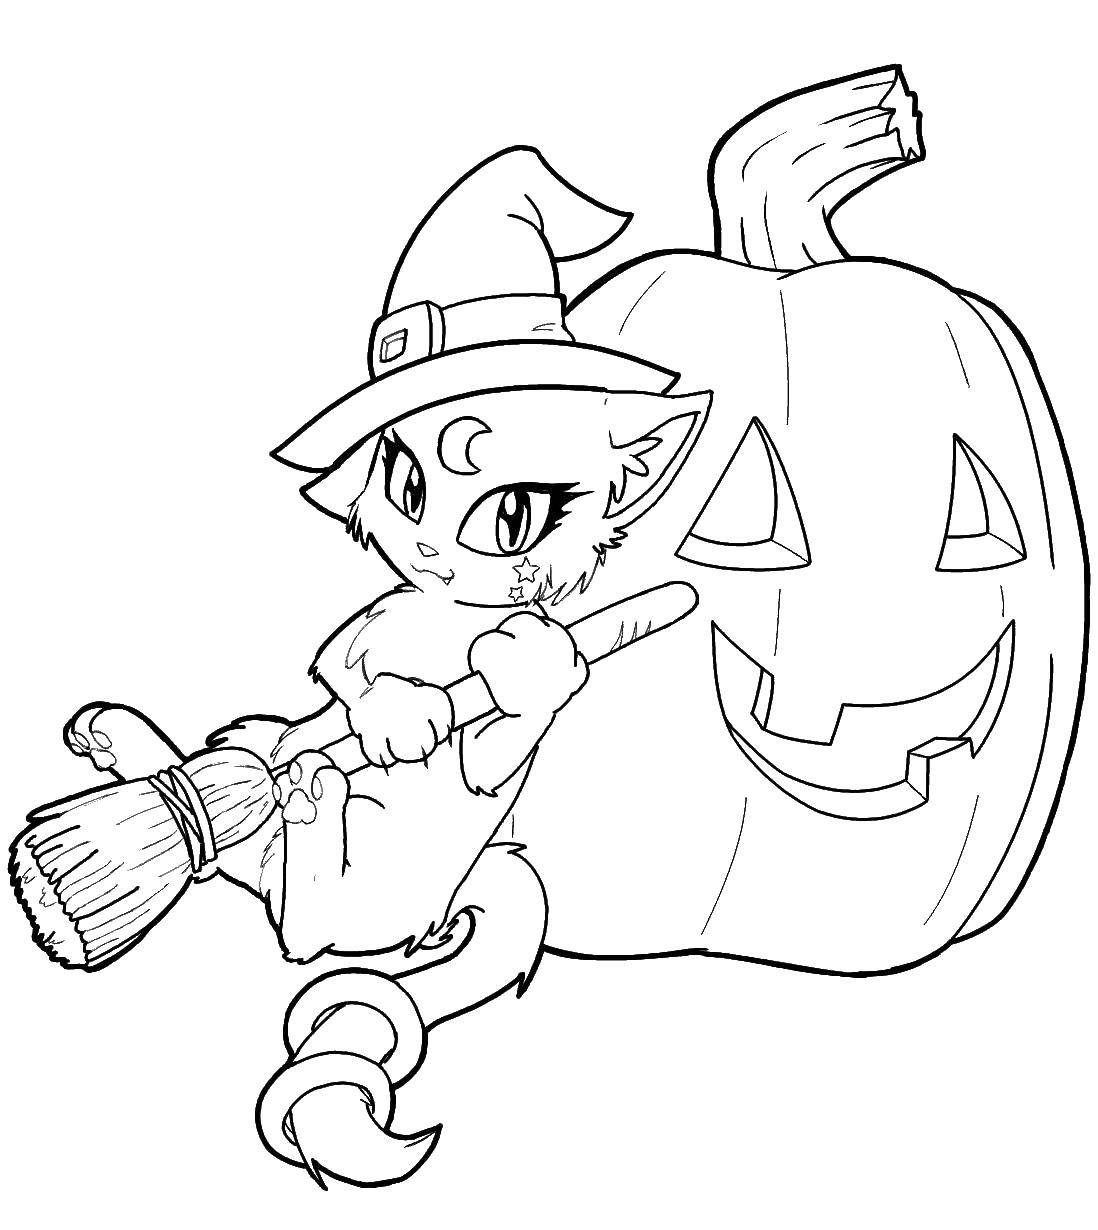 Coloring The cat and the broom. Category witch. Tags:  witch, cat, pumpkin, broom.